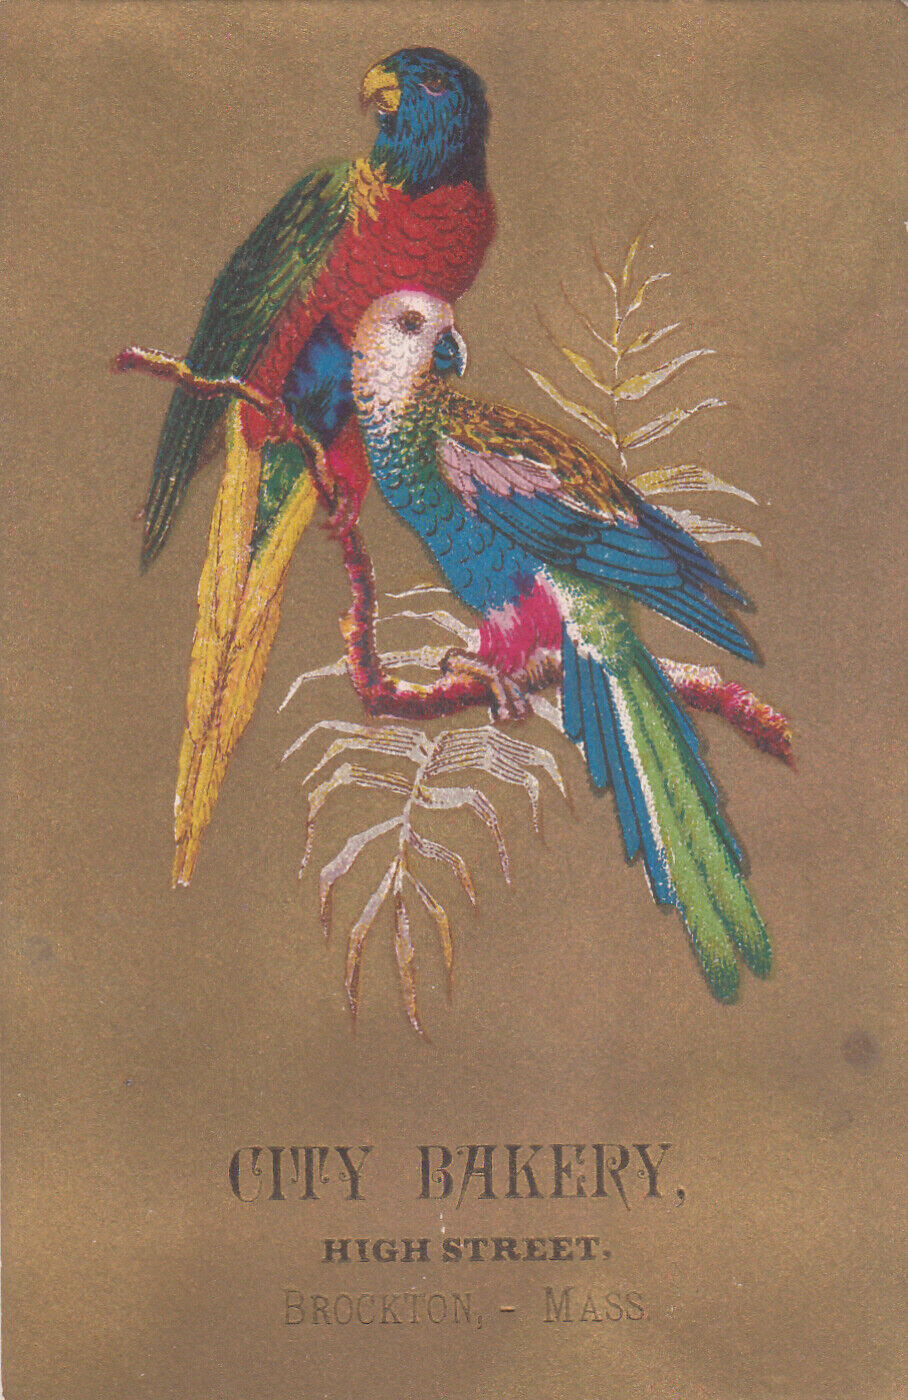 City Bakery Brockton MA Colorful Parrot Birds on Branch Vict Card c1880s